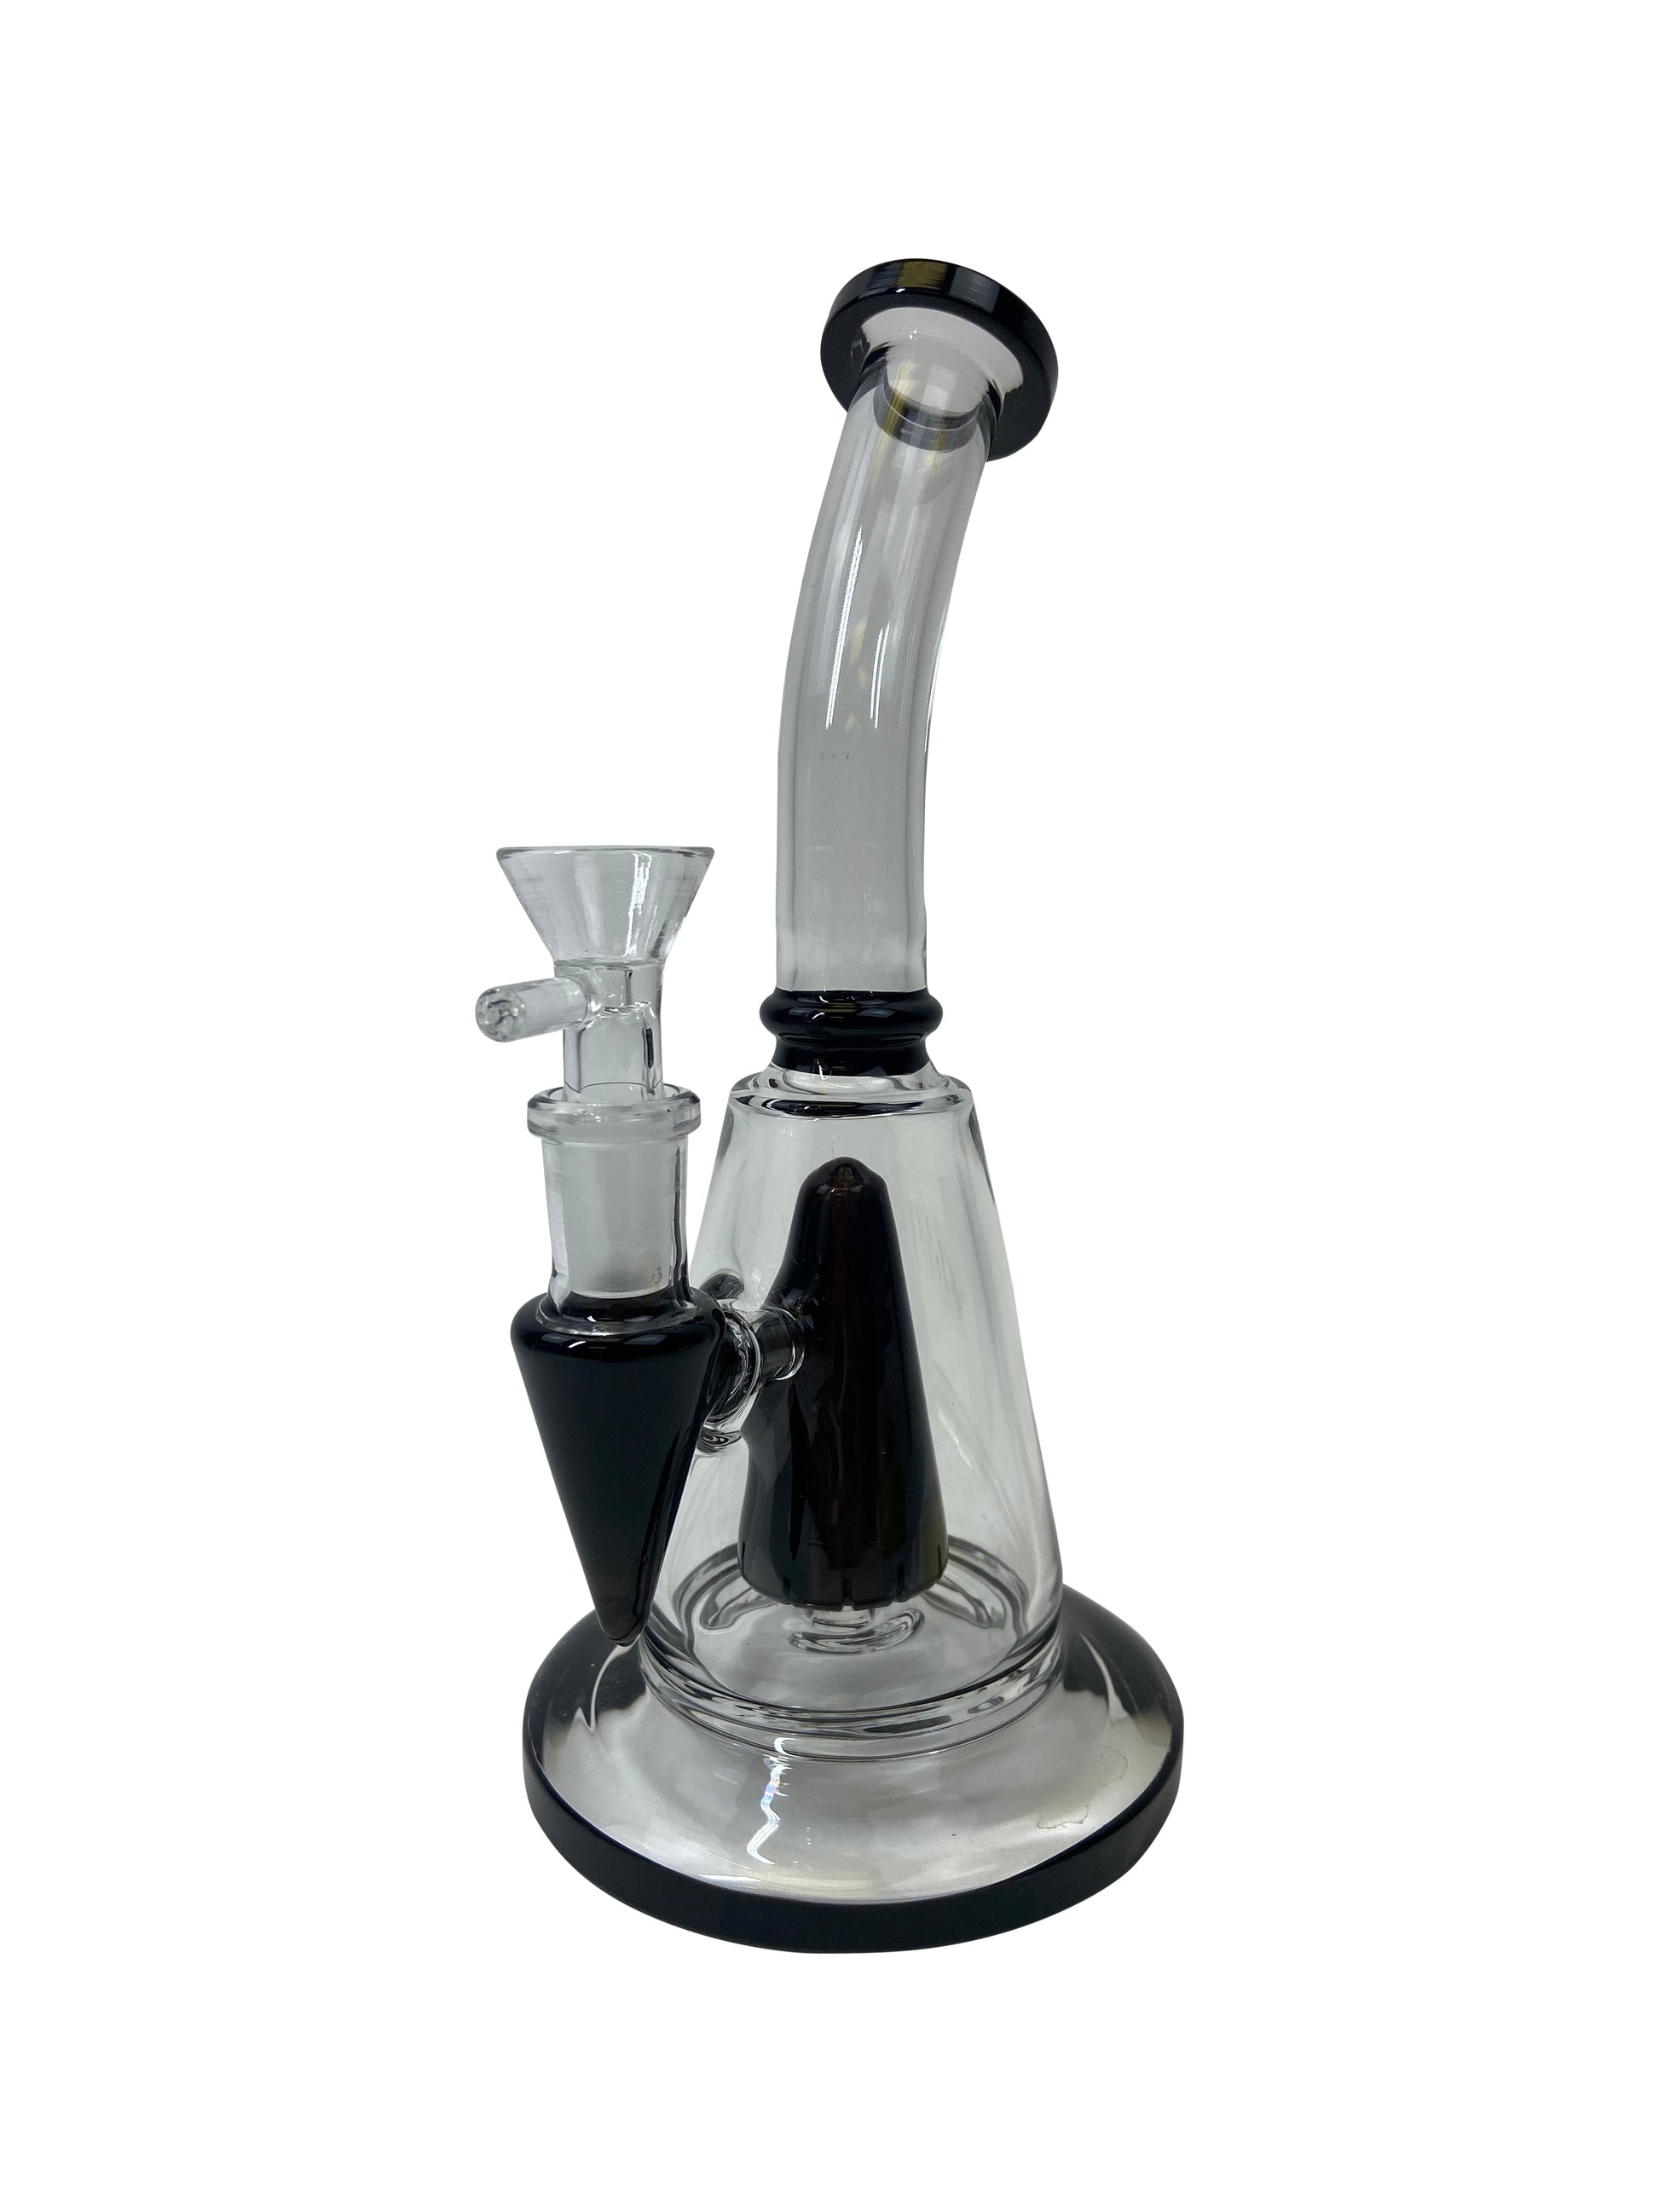 Maniak Table Top Glass Rig